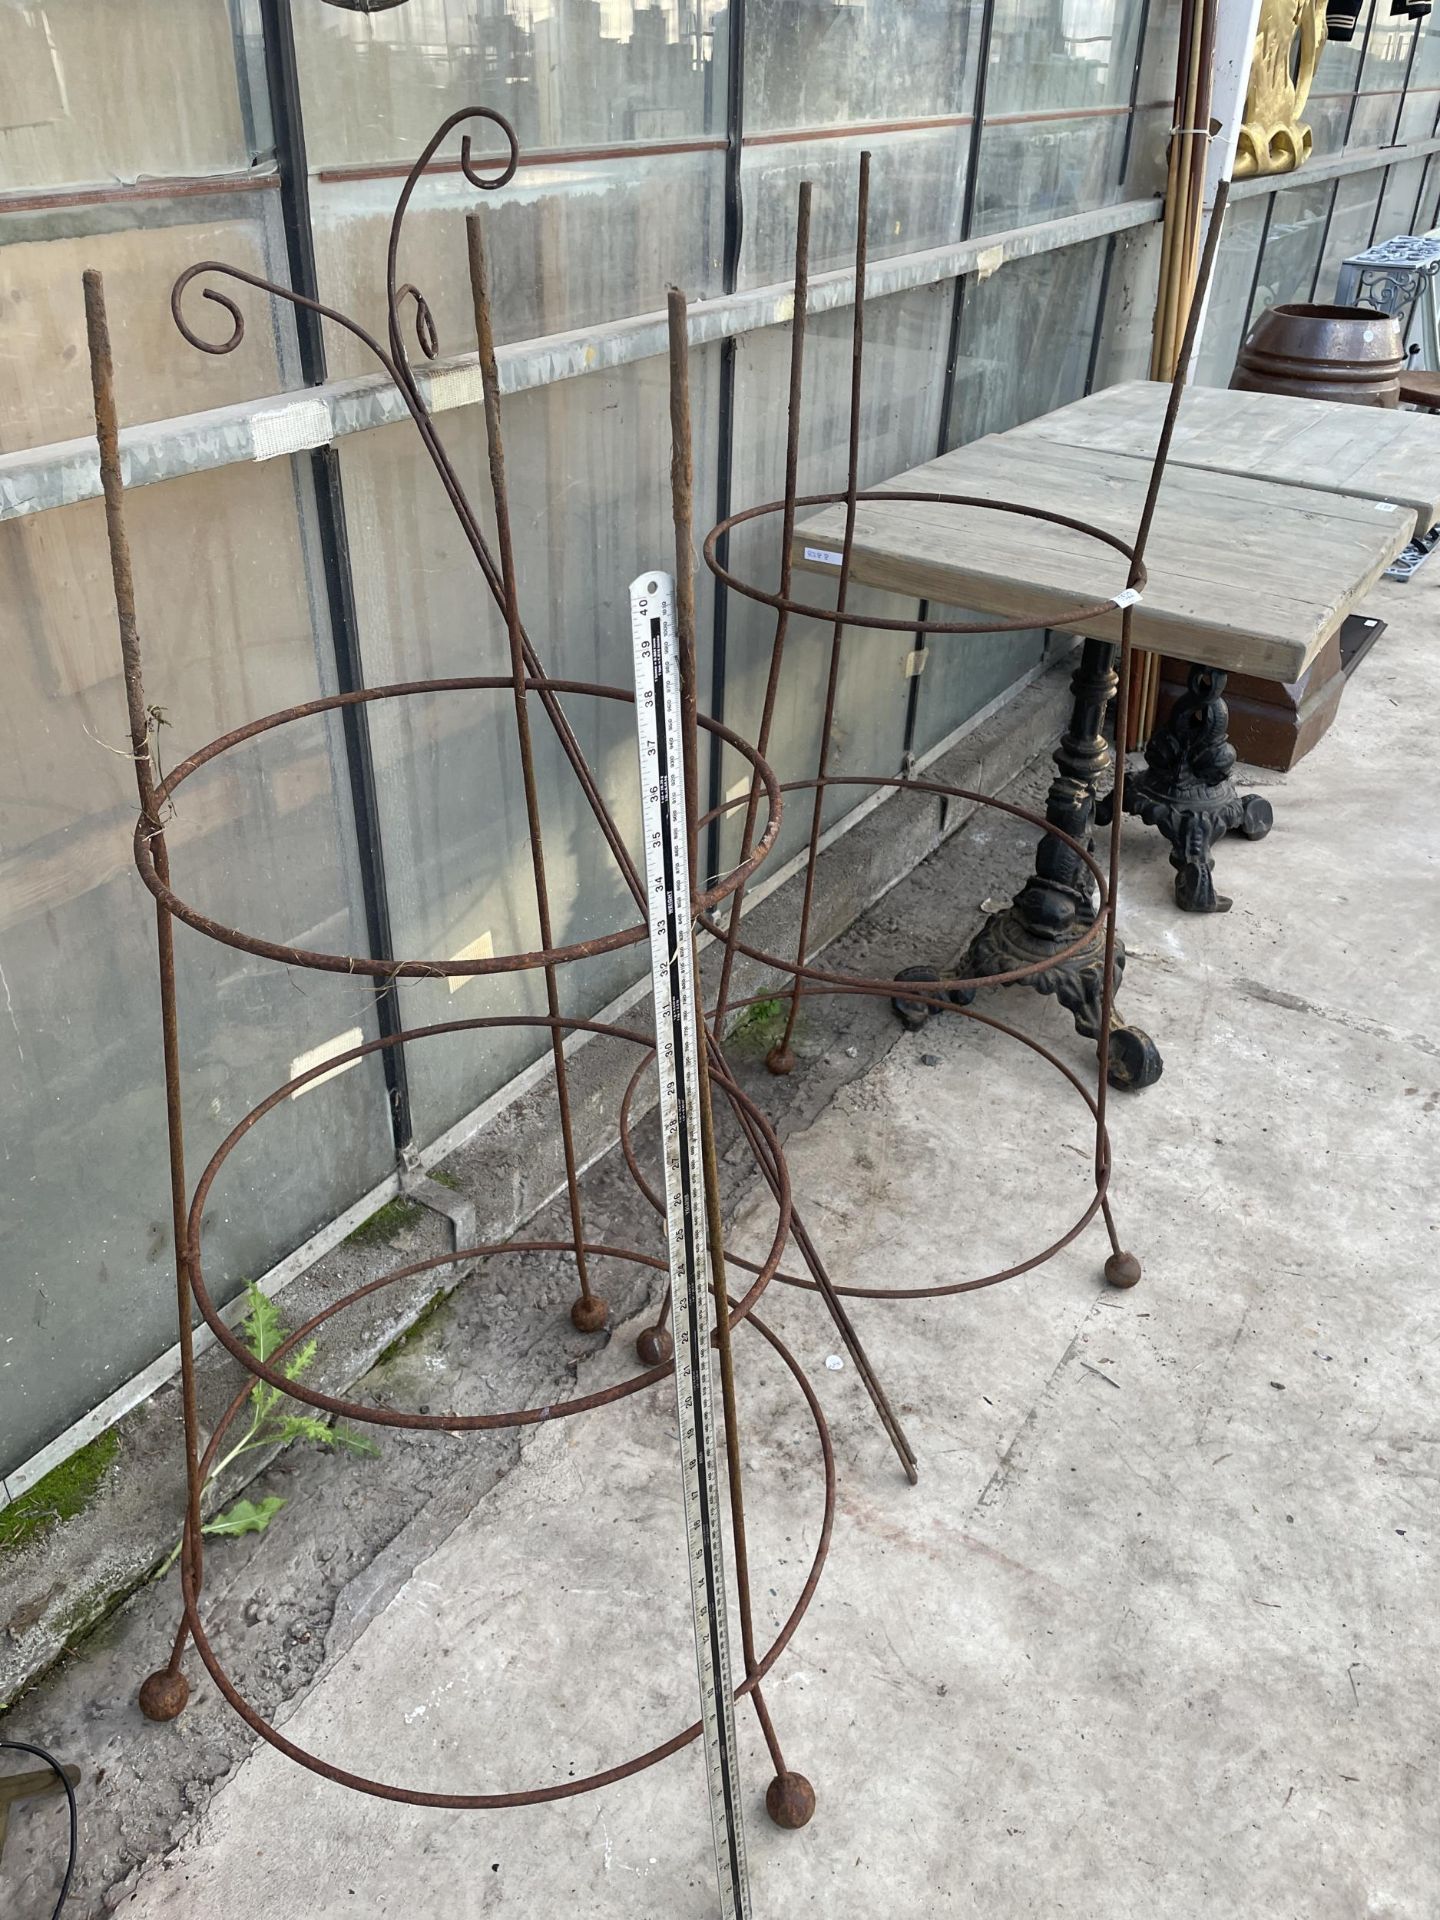 A PAIR OF STEEL PLANT CLIMBING FRAMES AND A STEEL BIRD FEEDER STAND - Image 2 of 3